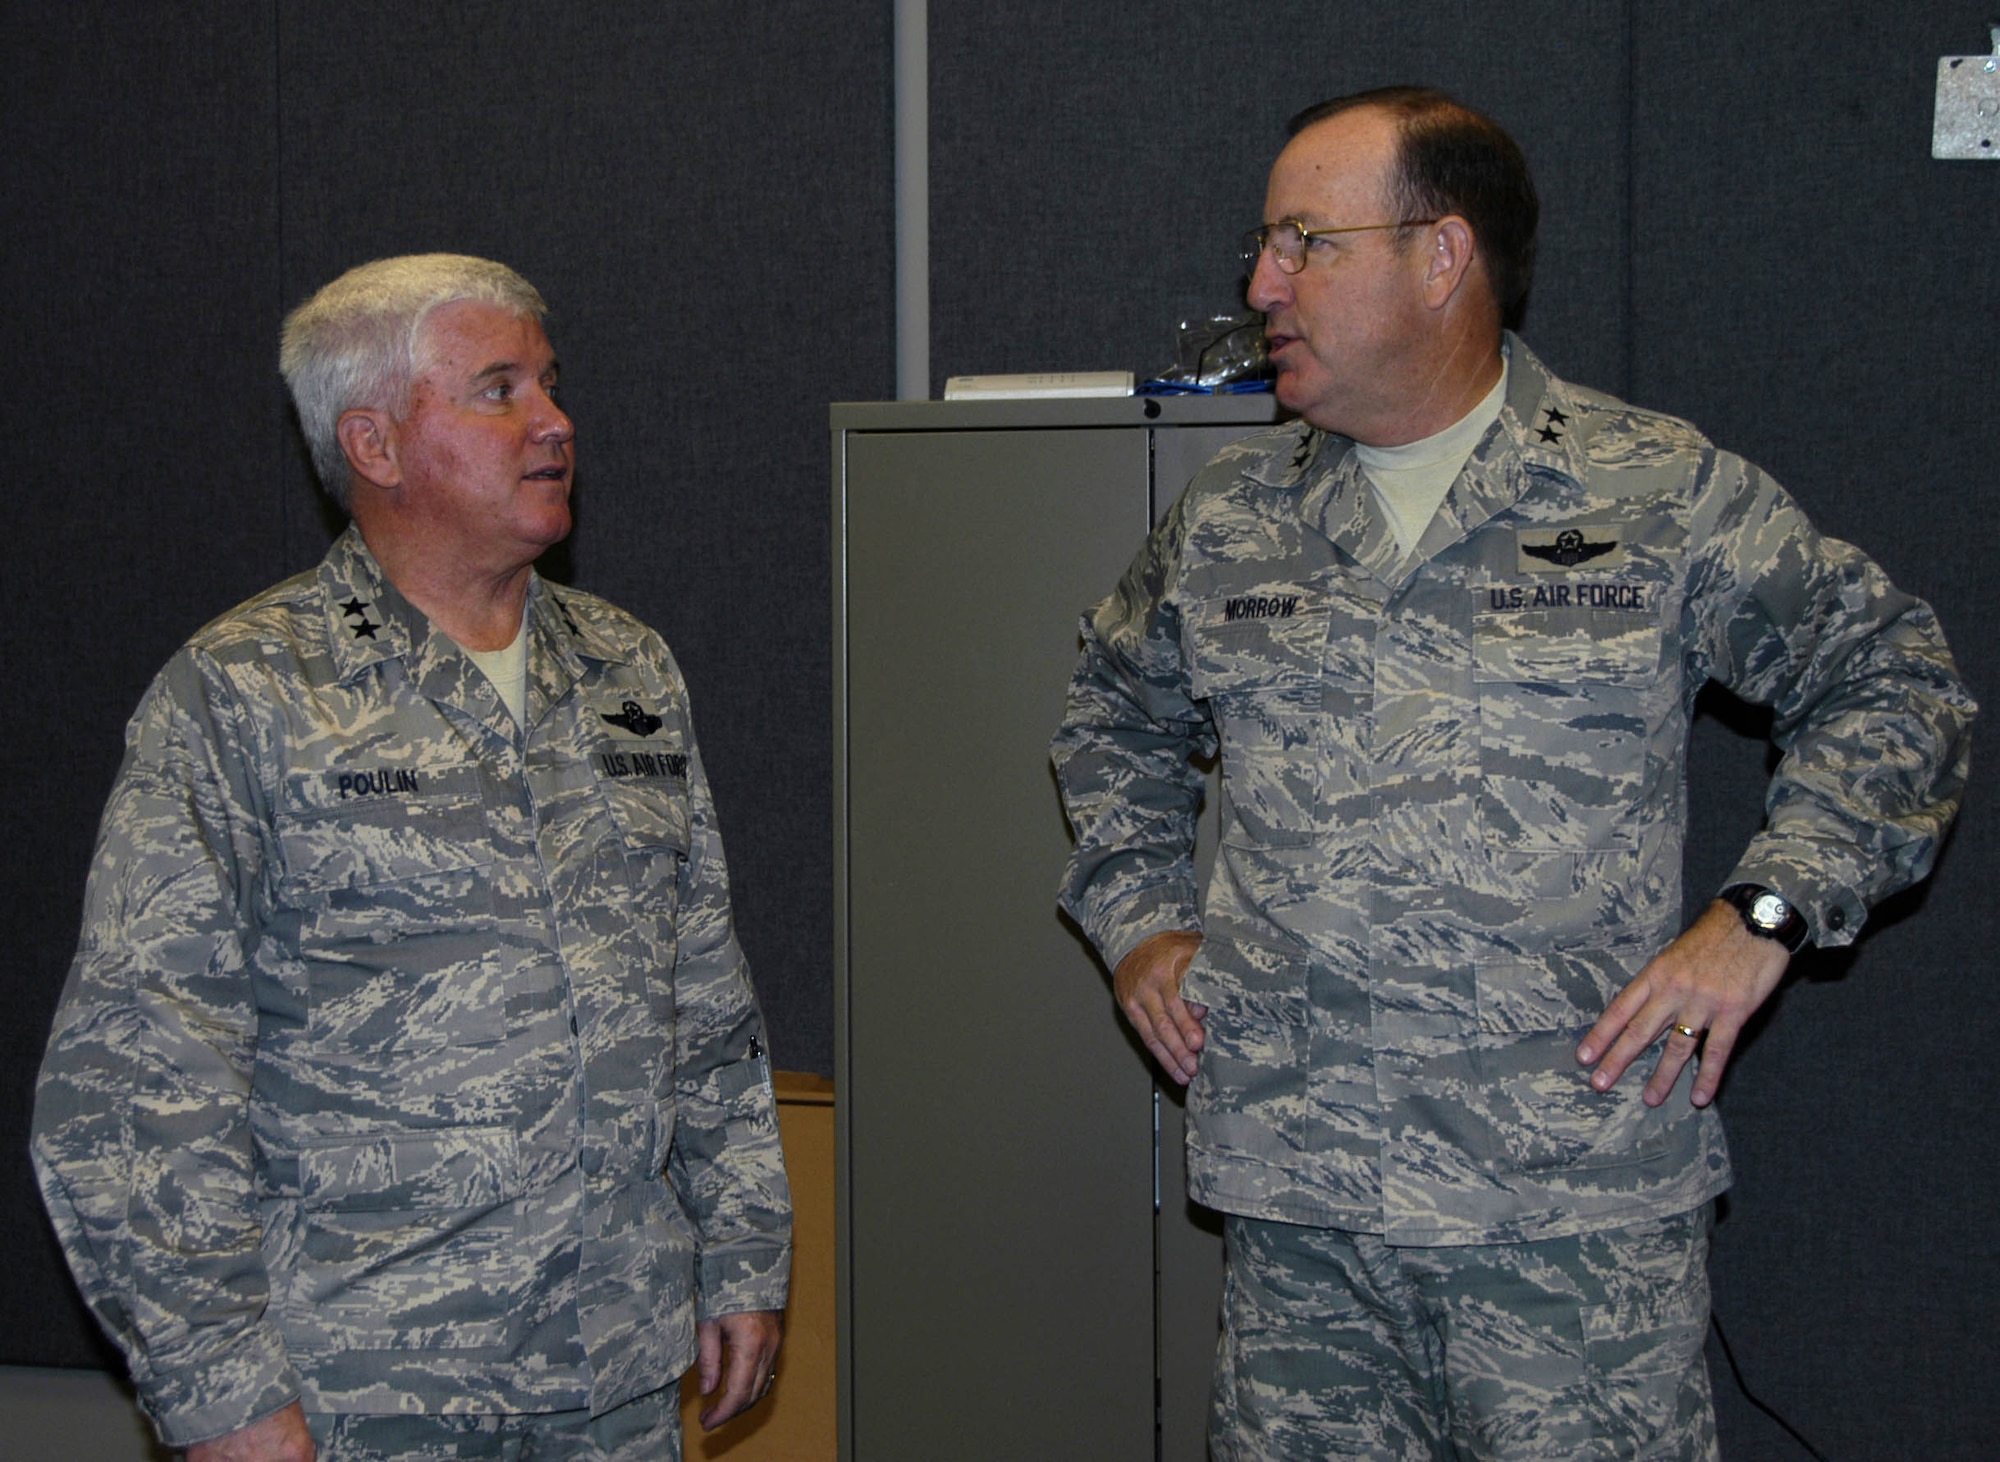 TYNDALL AIR FORCE BASE, Fla. - Maj. Gen. Allen Poulin, Air Force Reserve Command vice commander, and Maj. Gen. Hank Morrow, AFNORTH commander, discuss the commands’ roles and responsibilities during Gen. Poulin's visit with AFNORTH leadership Nov. 21.